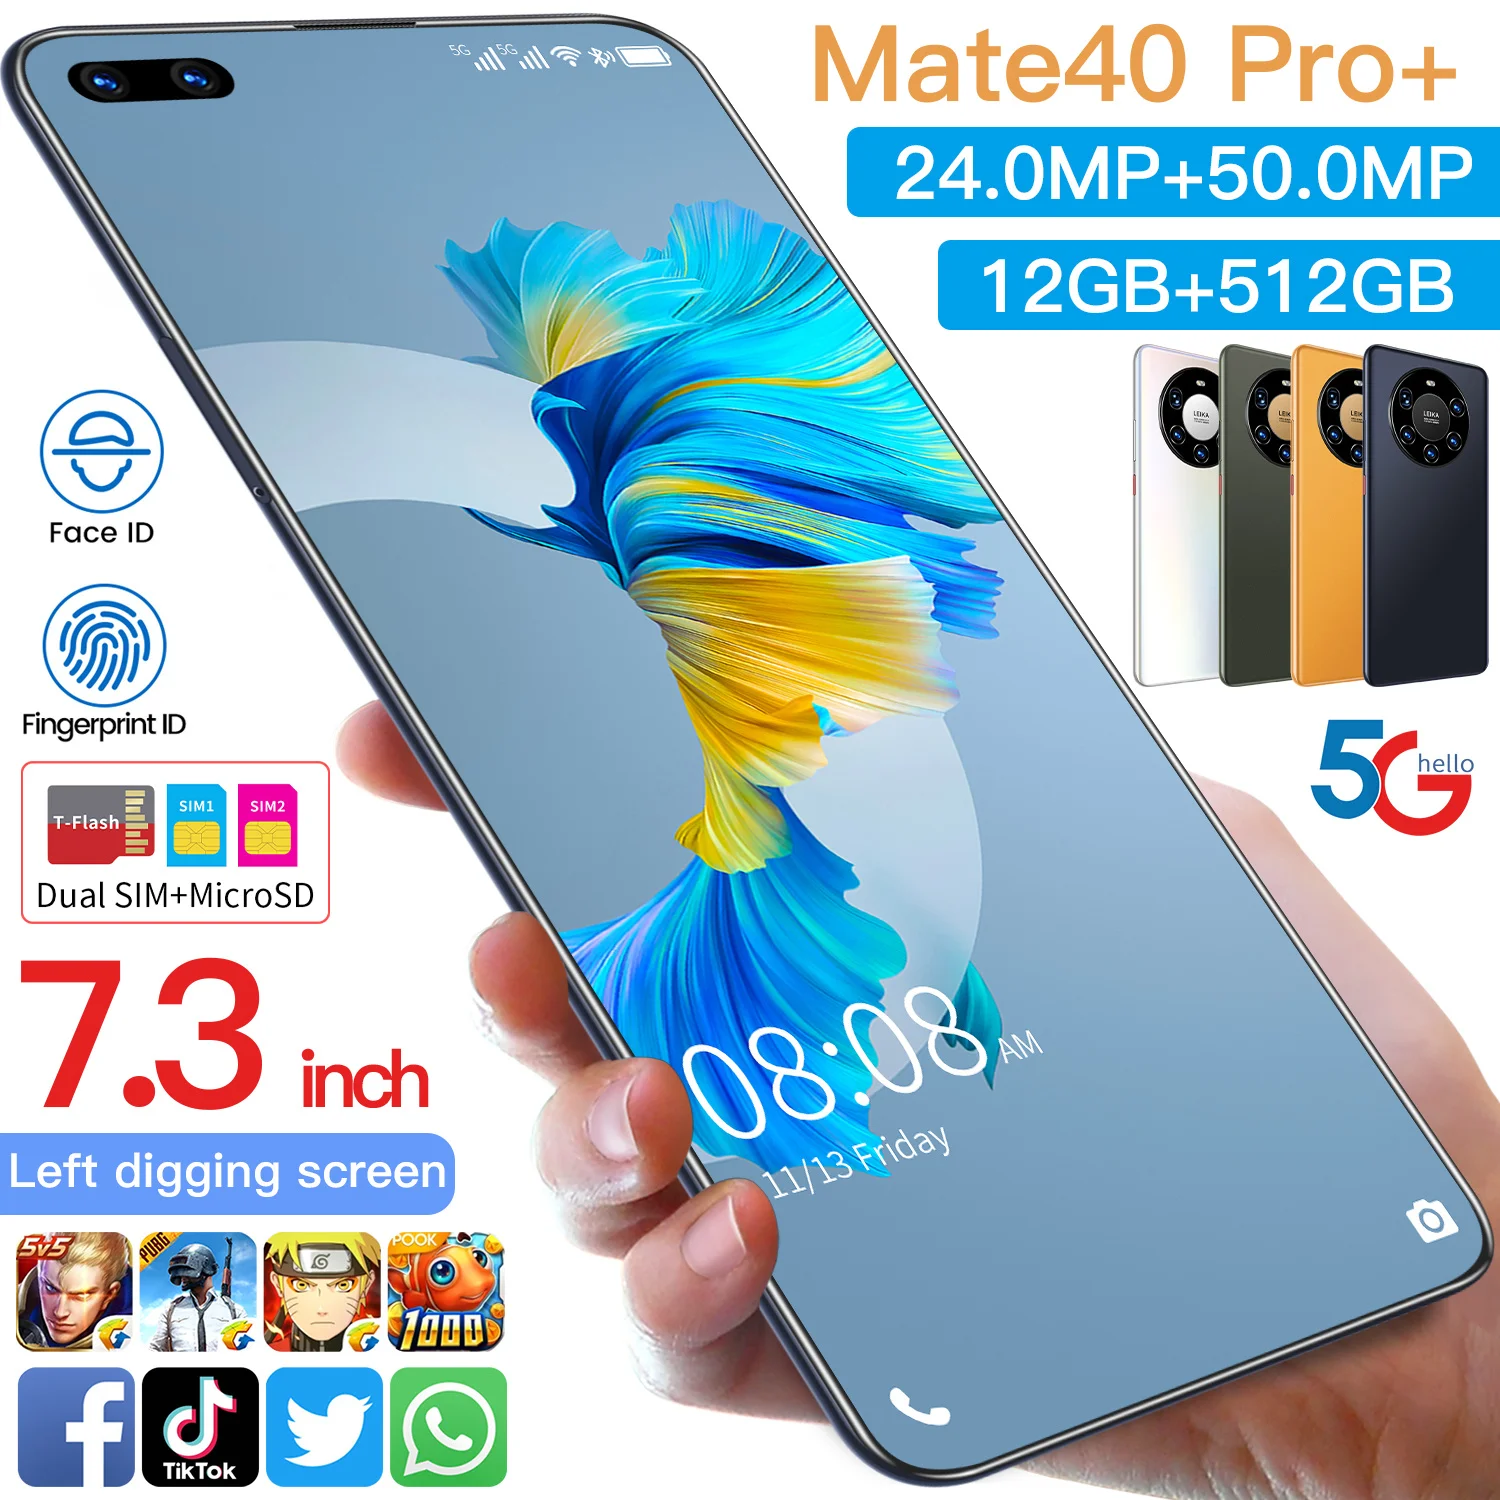 

Hot Selling Mobile Phones Mate 40 Pro+ 12GB+512GB 7.3 Inch Full Color Display Mobile Cell Smart Phone Android 10.0 Smartphones, Black yellow green silver